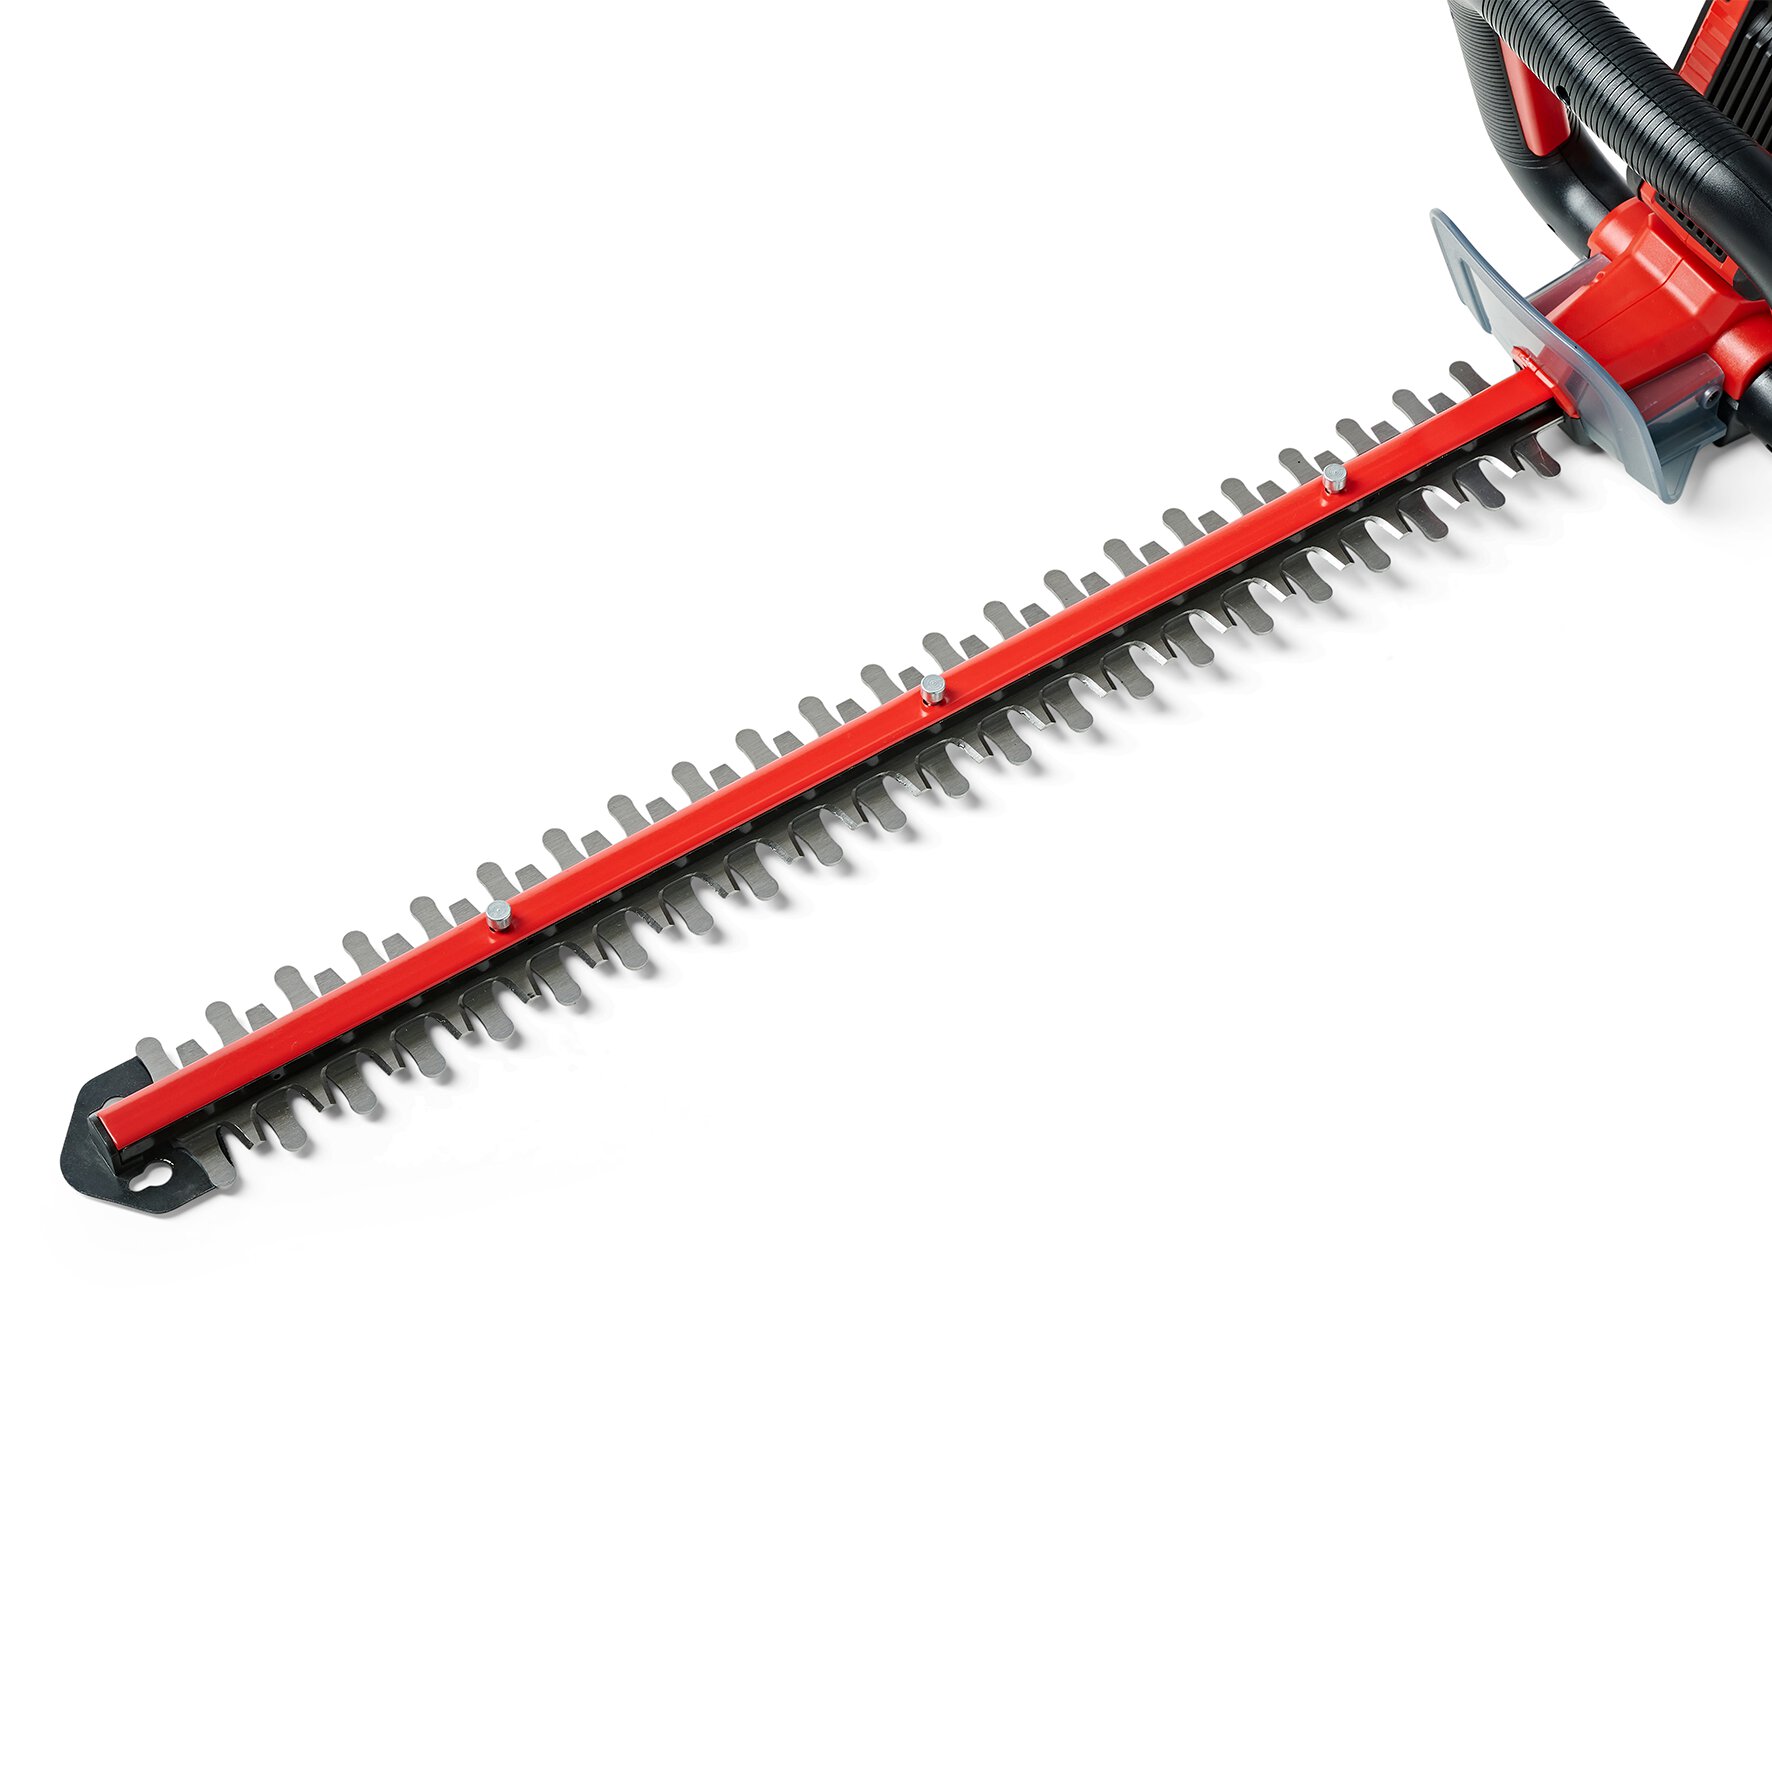 einhell-expert-cordless-hedge-trimmer-3410920-detail_image-004